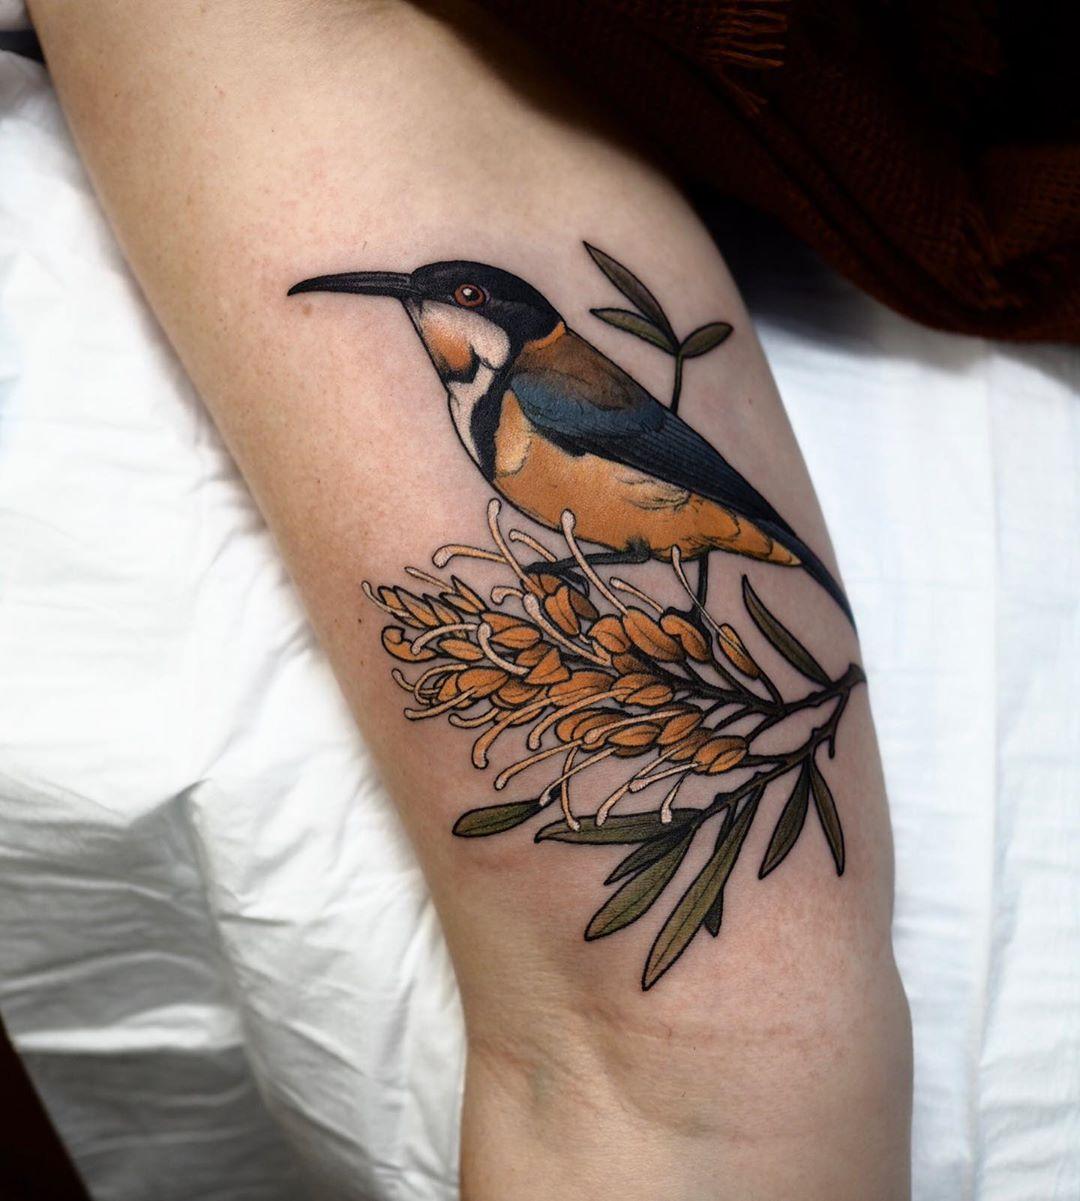 Grevillea and Eastern spinebill tattoo by @sophiabaughan